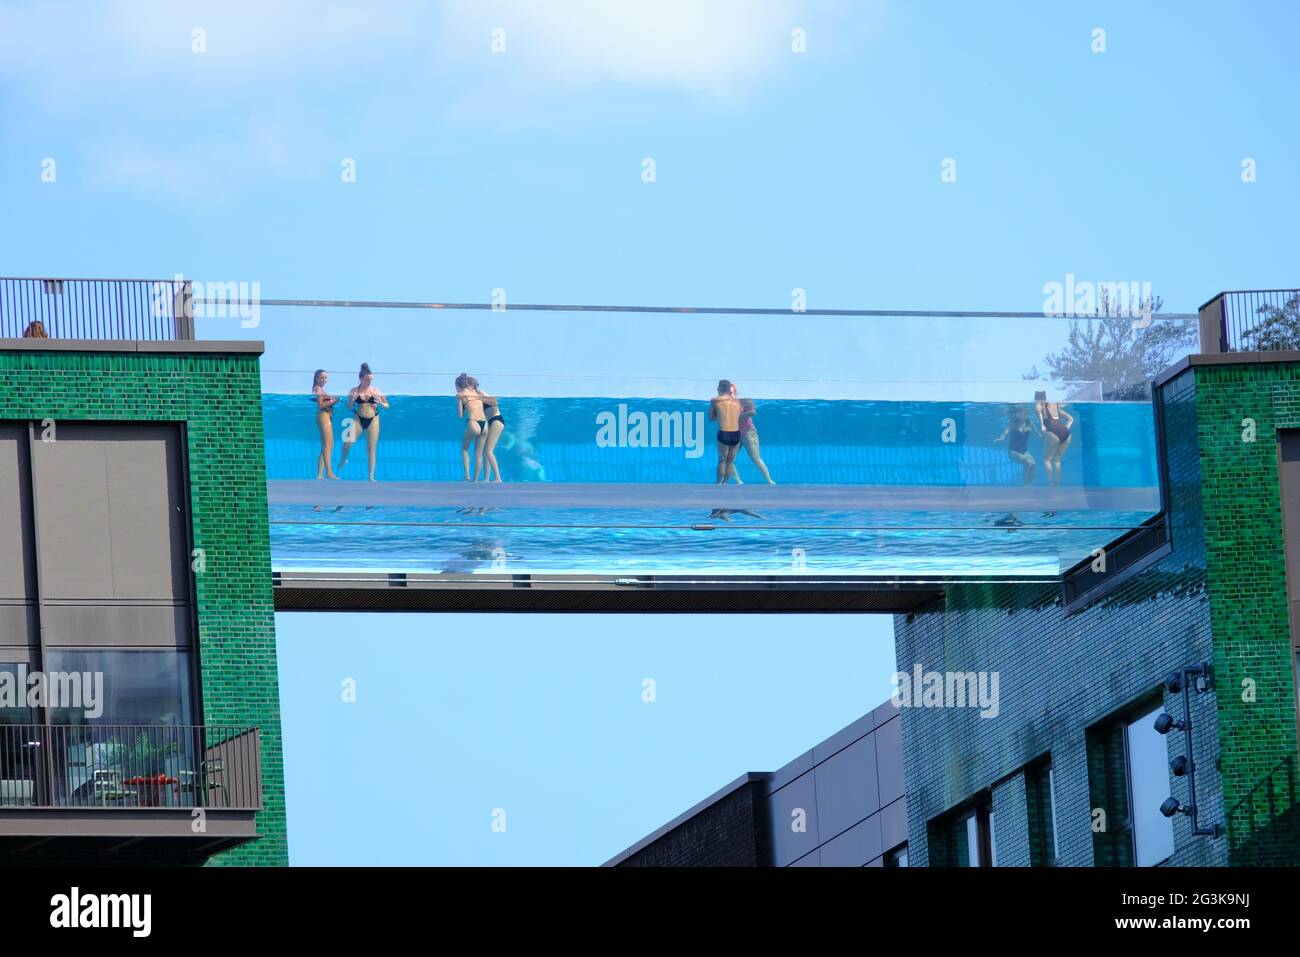 London Uk Swimmers At The Newly Opened Sky Pool At Embassy Gardens Wave To The Camera The Transparent Pool Is Suspended Between Two Buildings Stock Photo Alamy